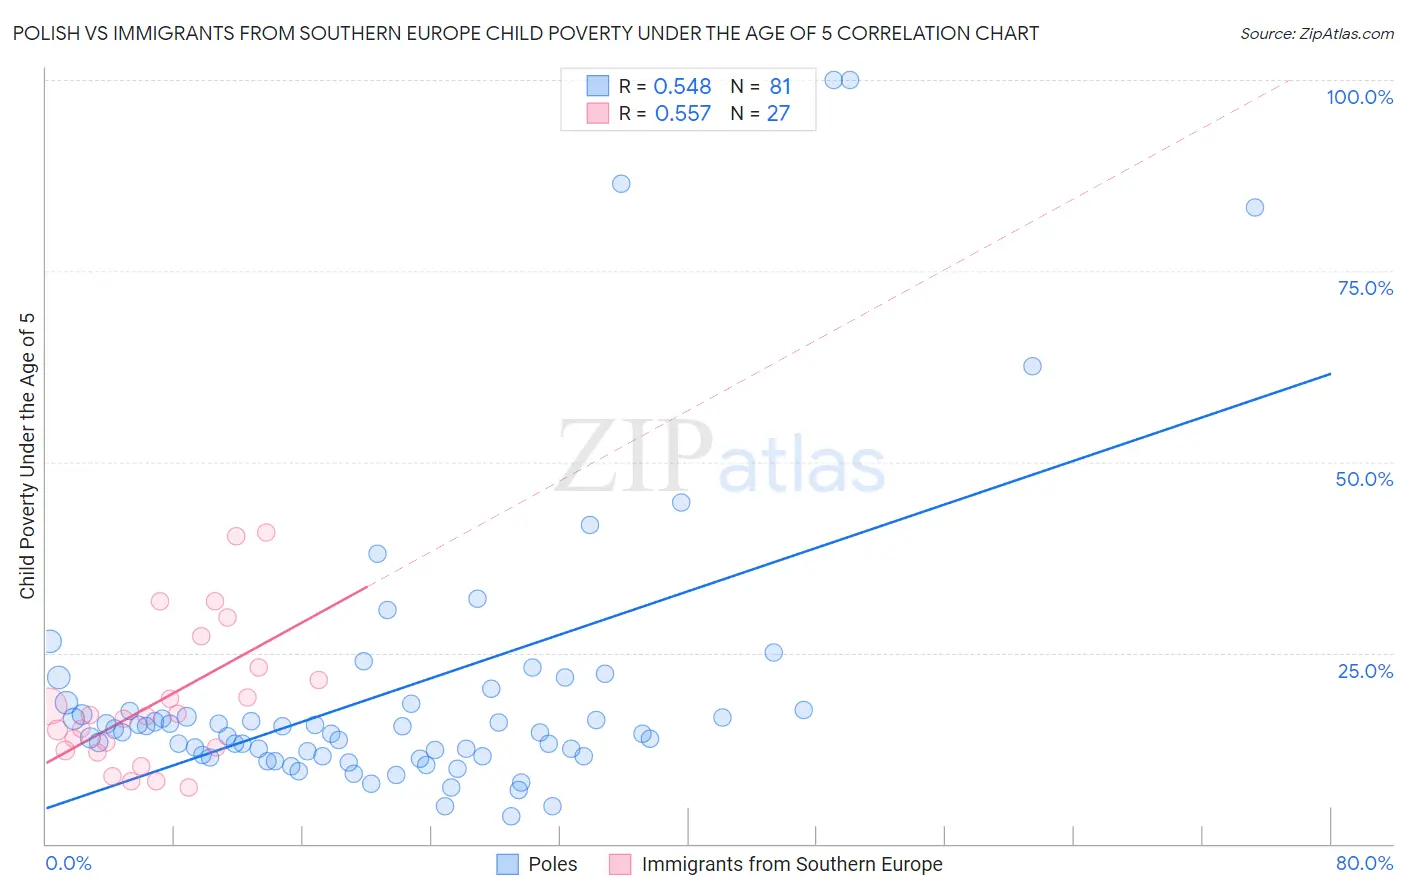 Polish vs Immigrants from Southern Europe Child Poverty Under the Age of 5